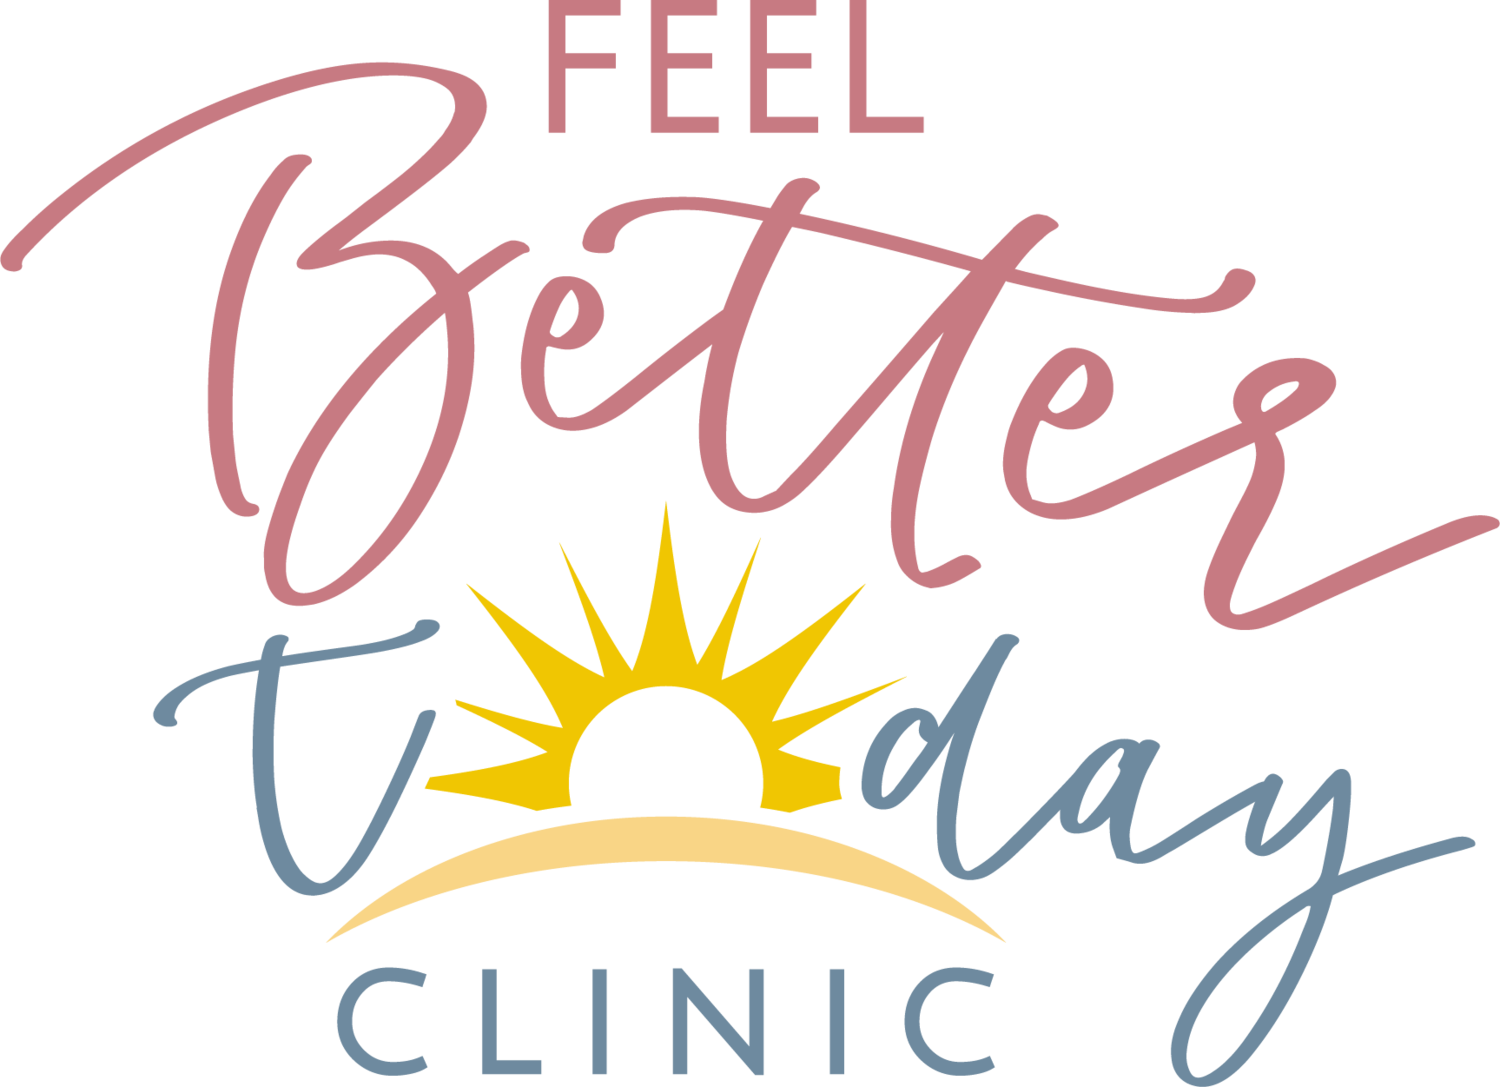 Feel Better Today Clinic